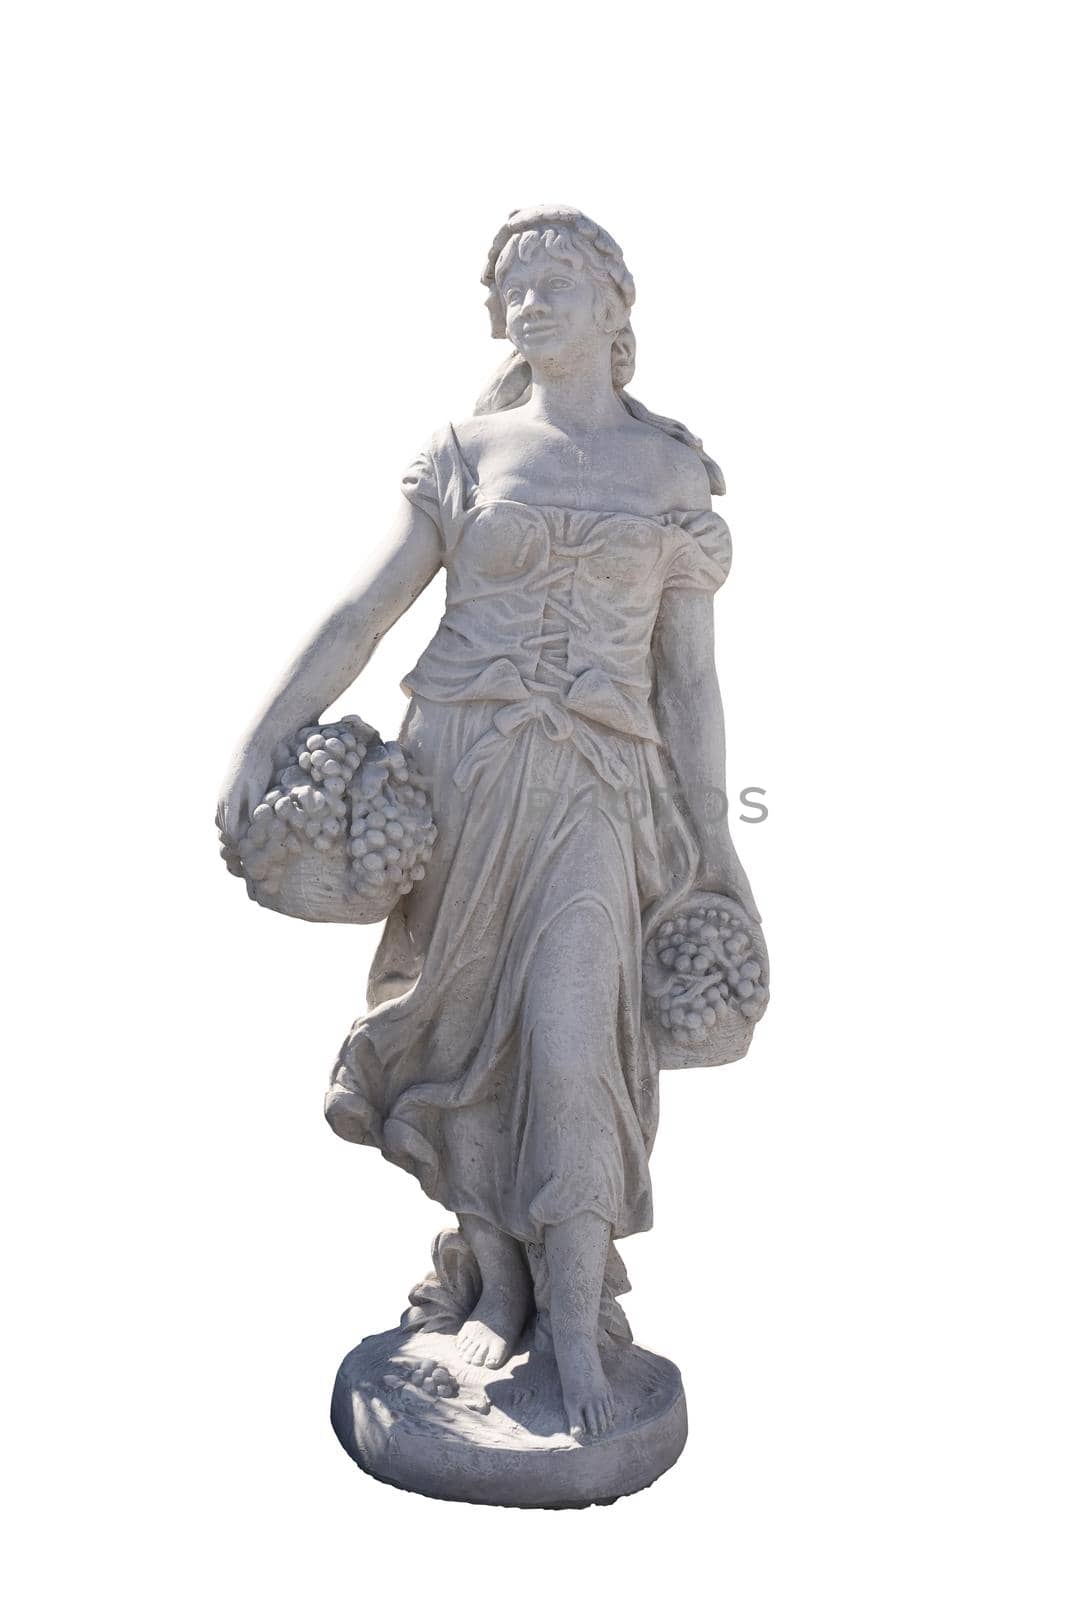 Stone sculpture of woman holding baskets with grapes on white background. art and classical style romantic figurative stone sculpture.